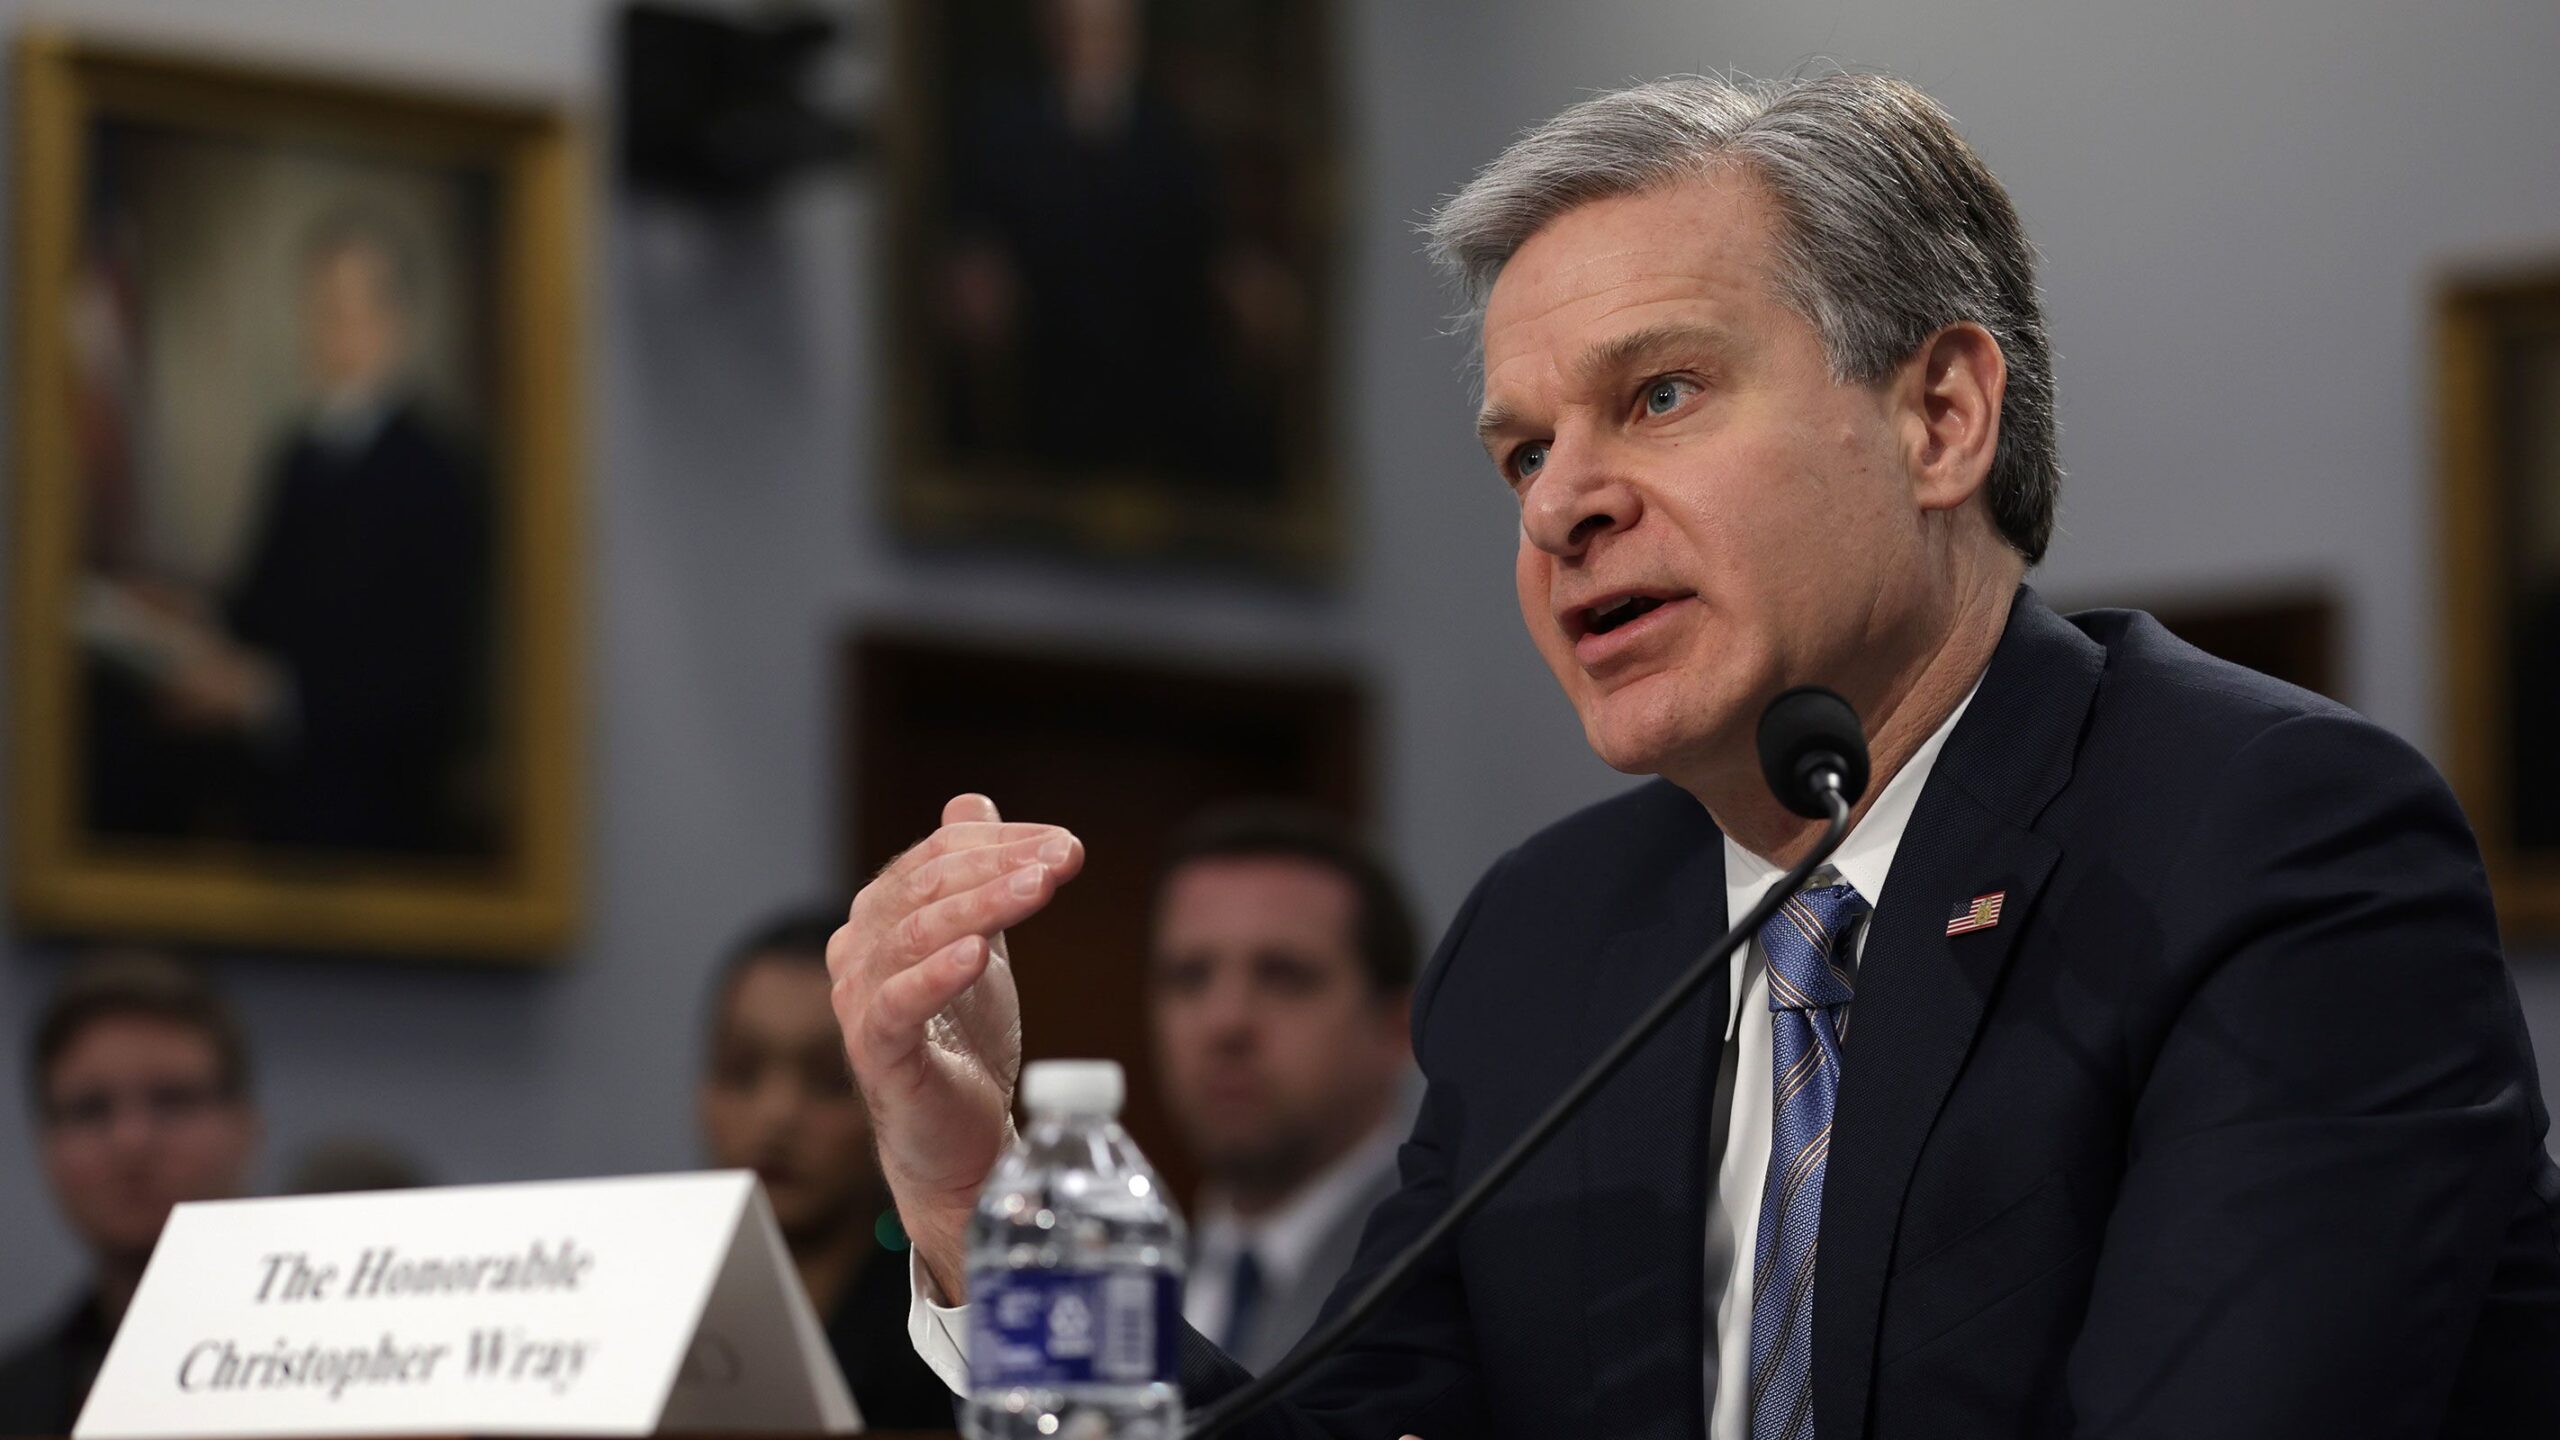 FBI Director Christopher Wray said on Oct. 15 that the agency has seen an increase in reported thre...